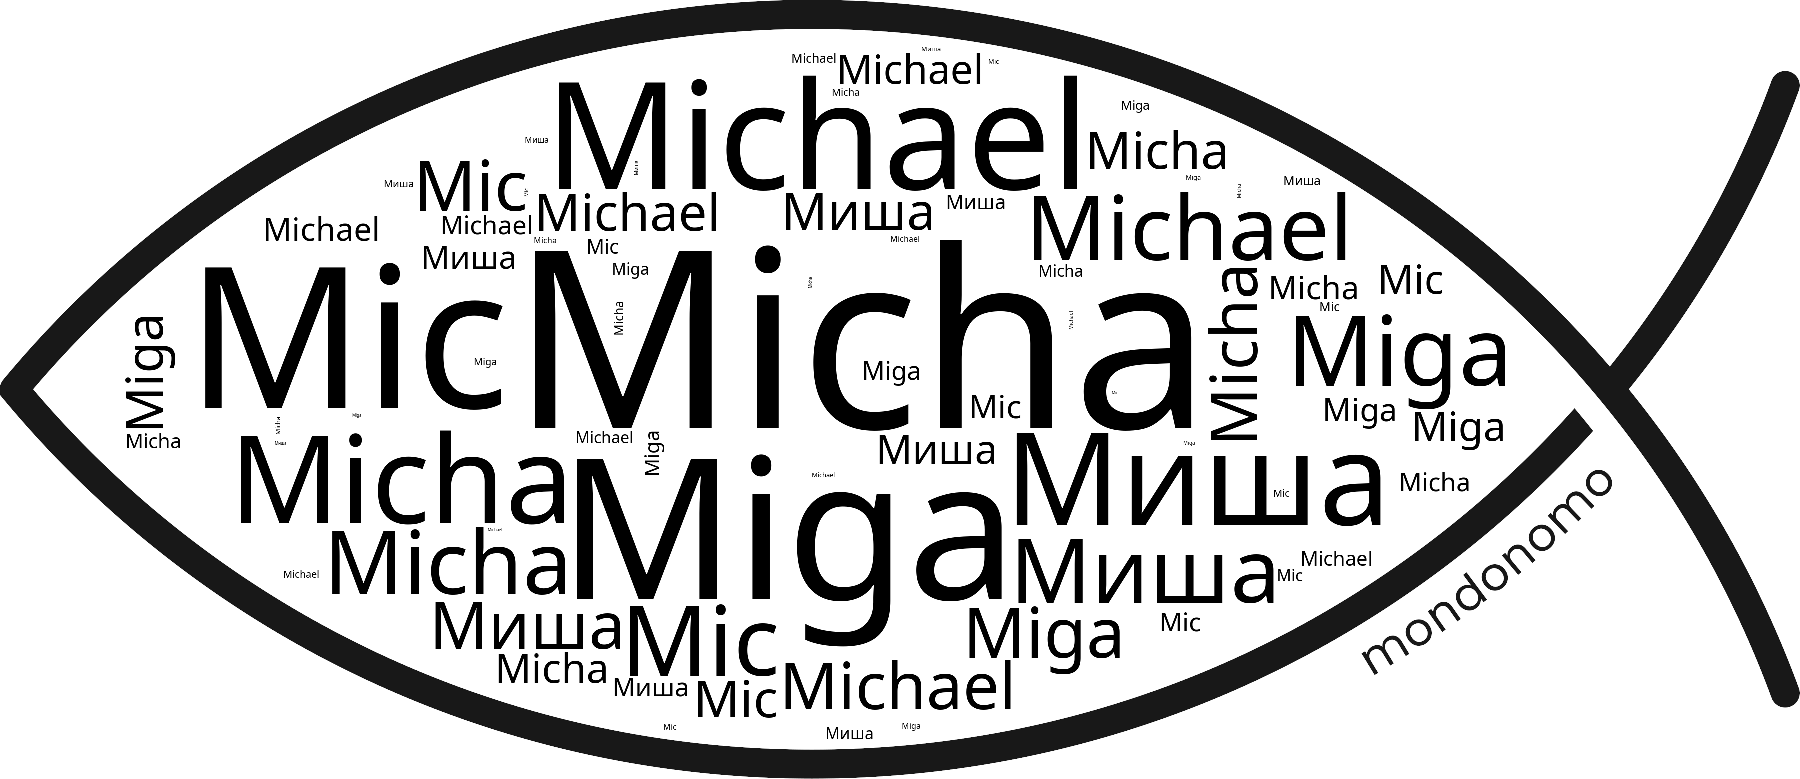 Name Micha in the world's Bibles